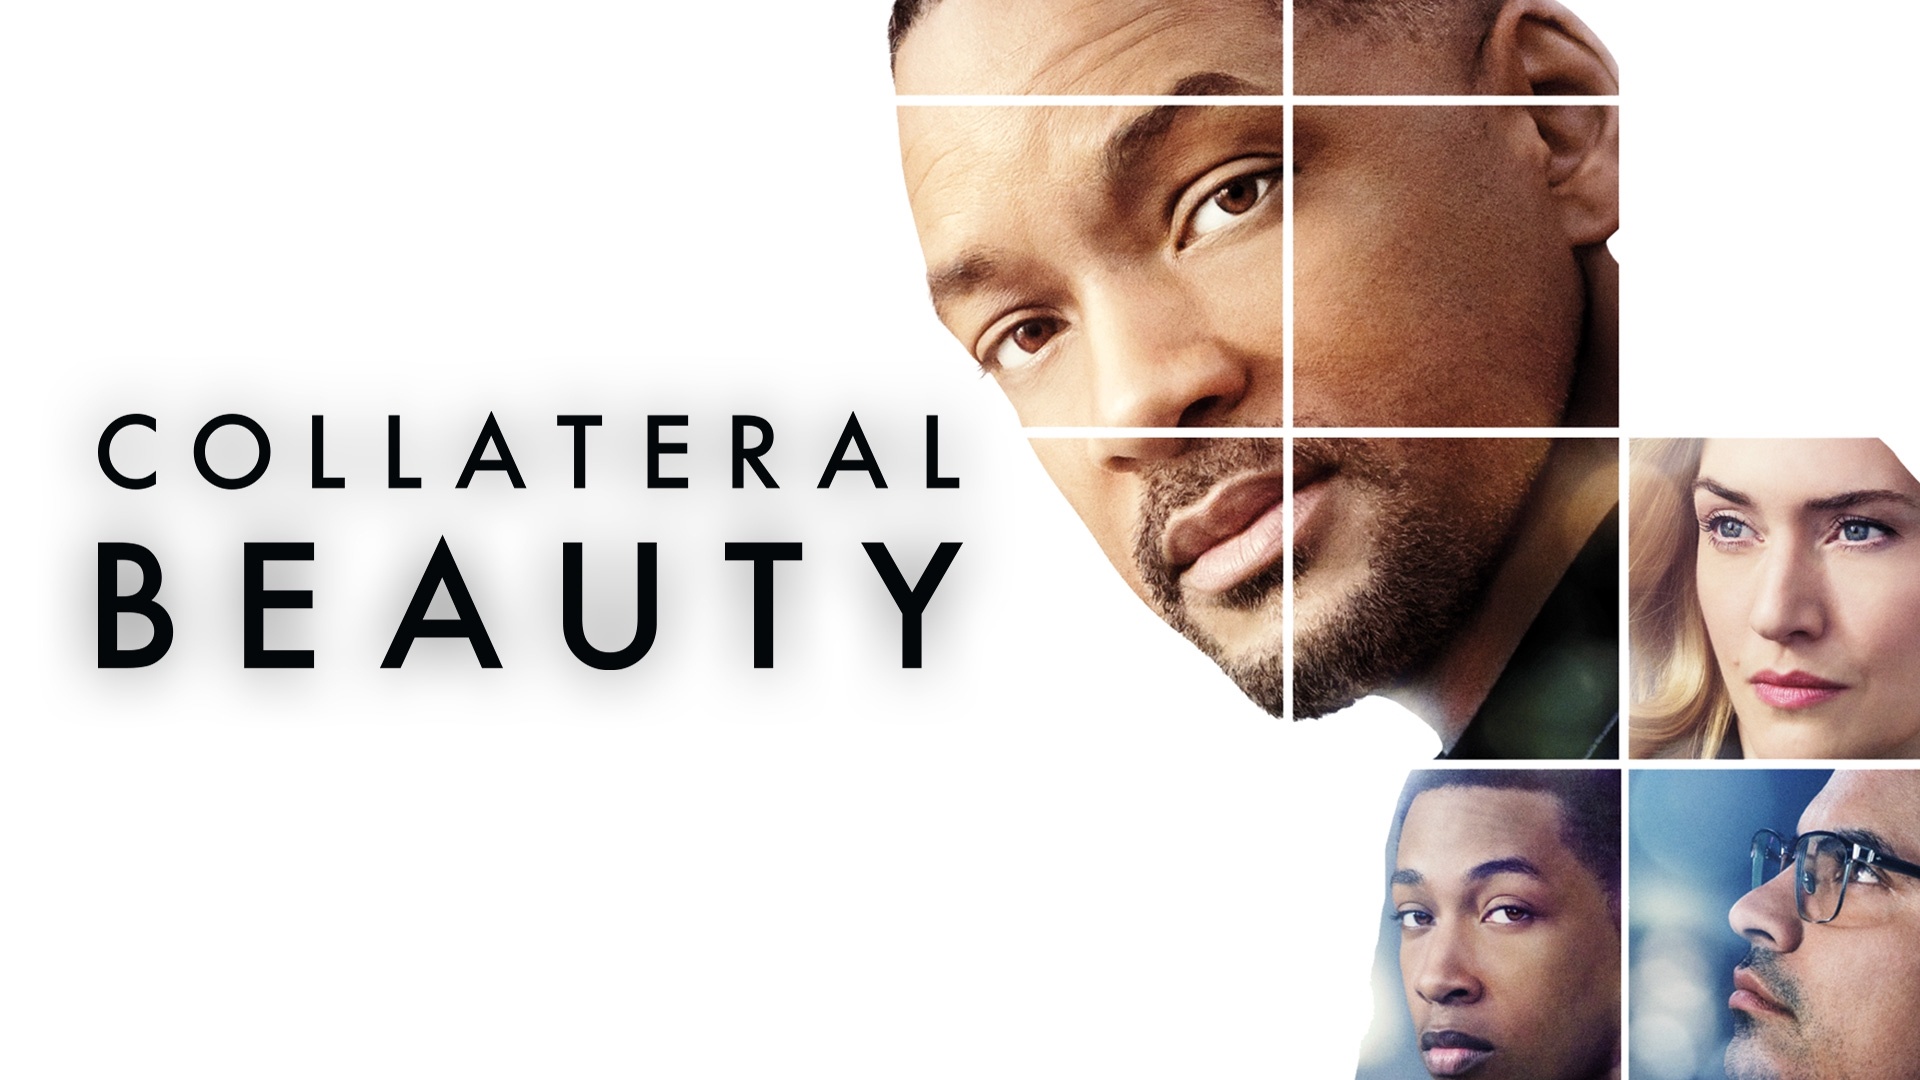 Collateral Beauty film, Probing life's purpose, Healing journey, Unexpected revelations, 1920x1080 Full HD Desktop